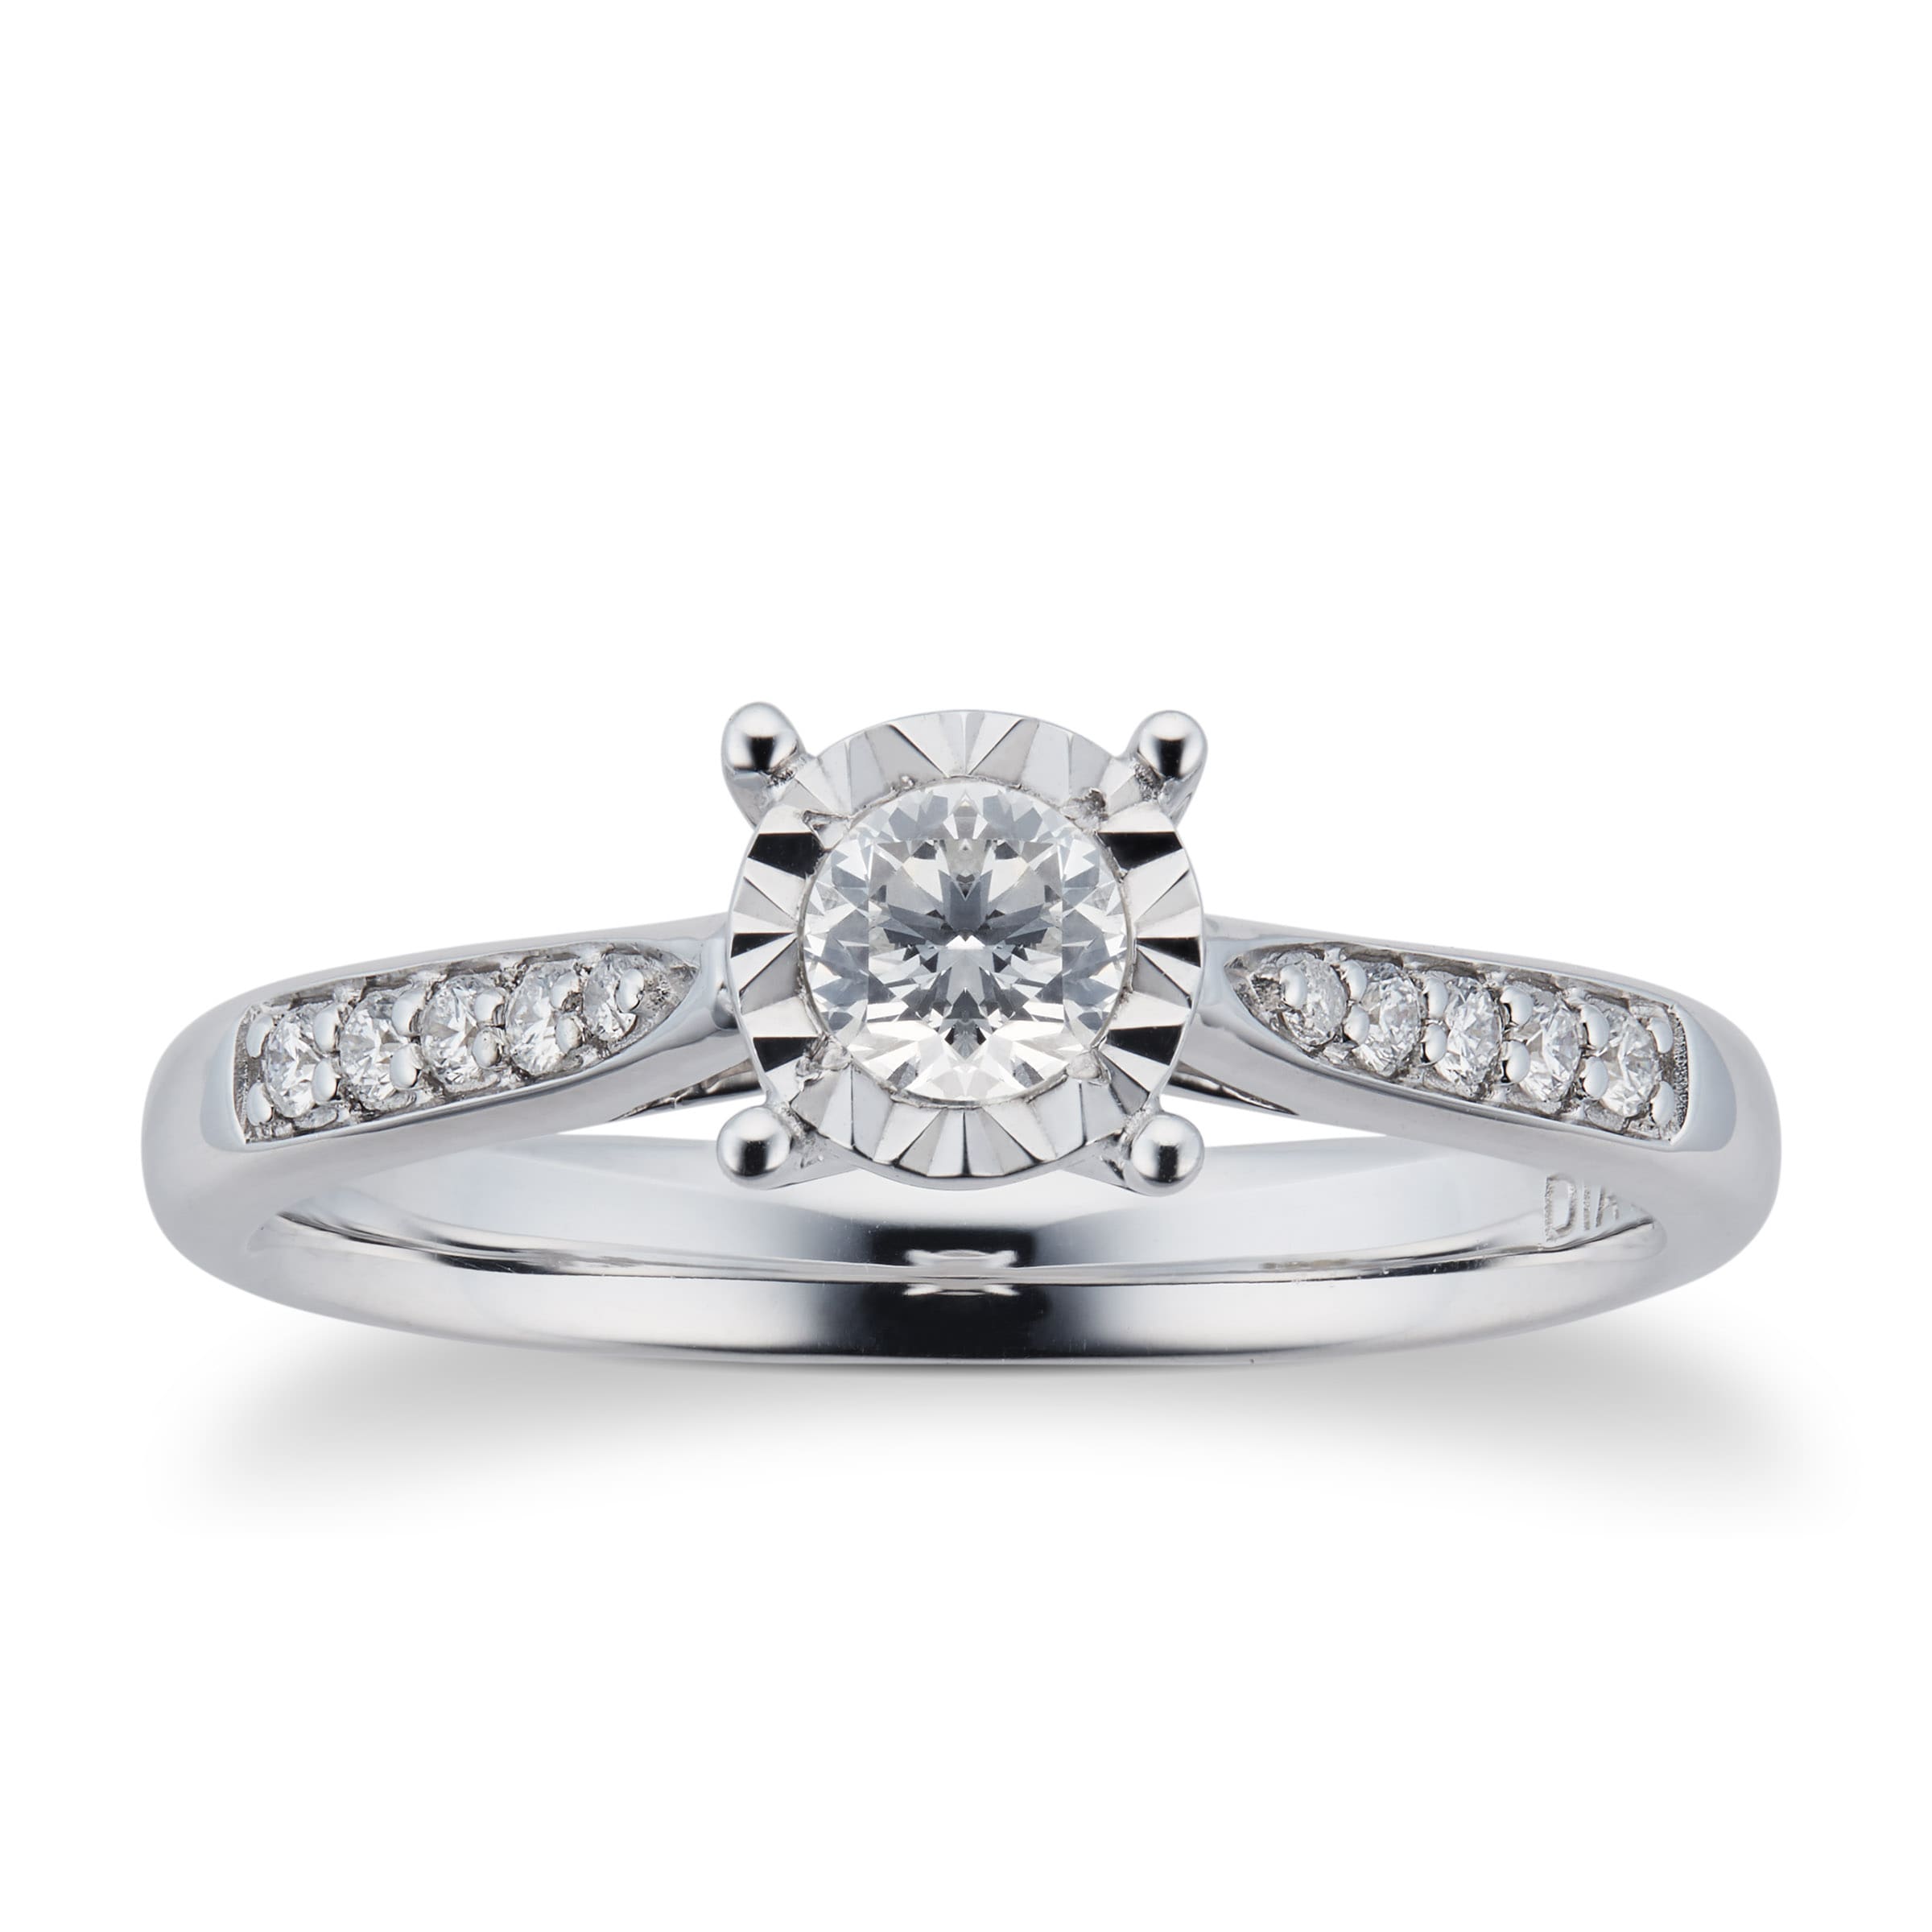 Brilliant Cut 034 Total Carat Weight Solitaire And Diamond Set Shoulders Ring In 9 Carat White Gold Ring Size L